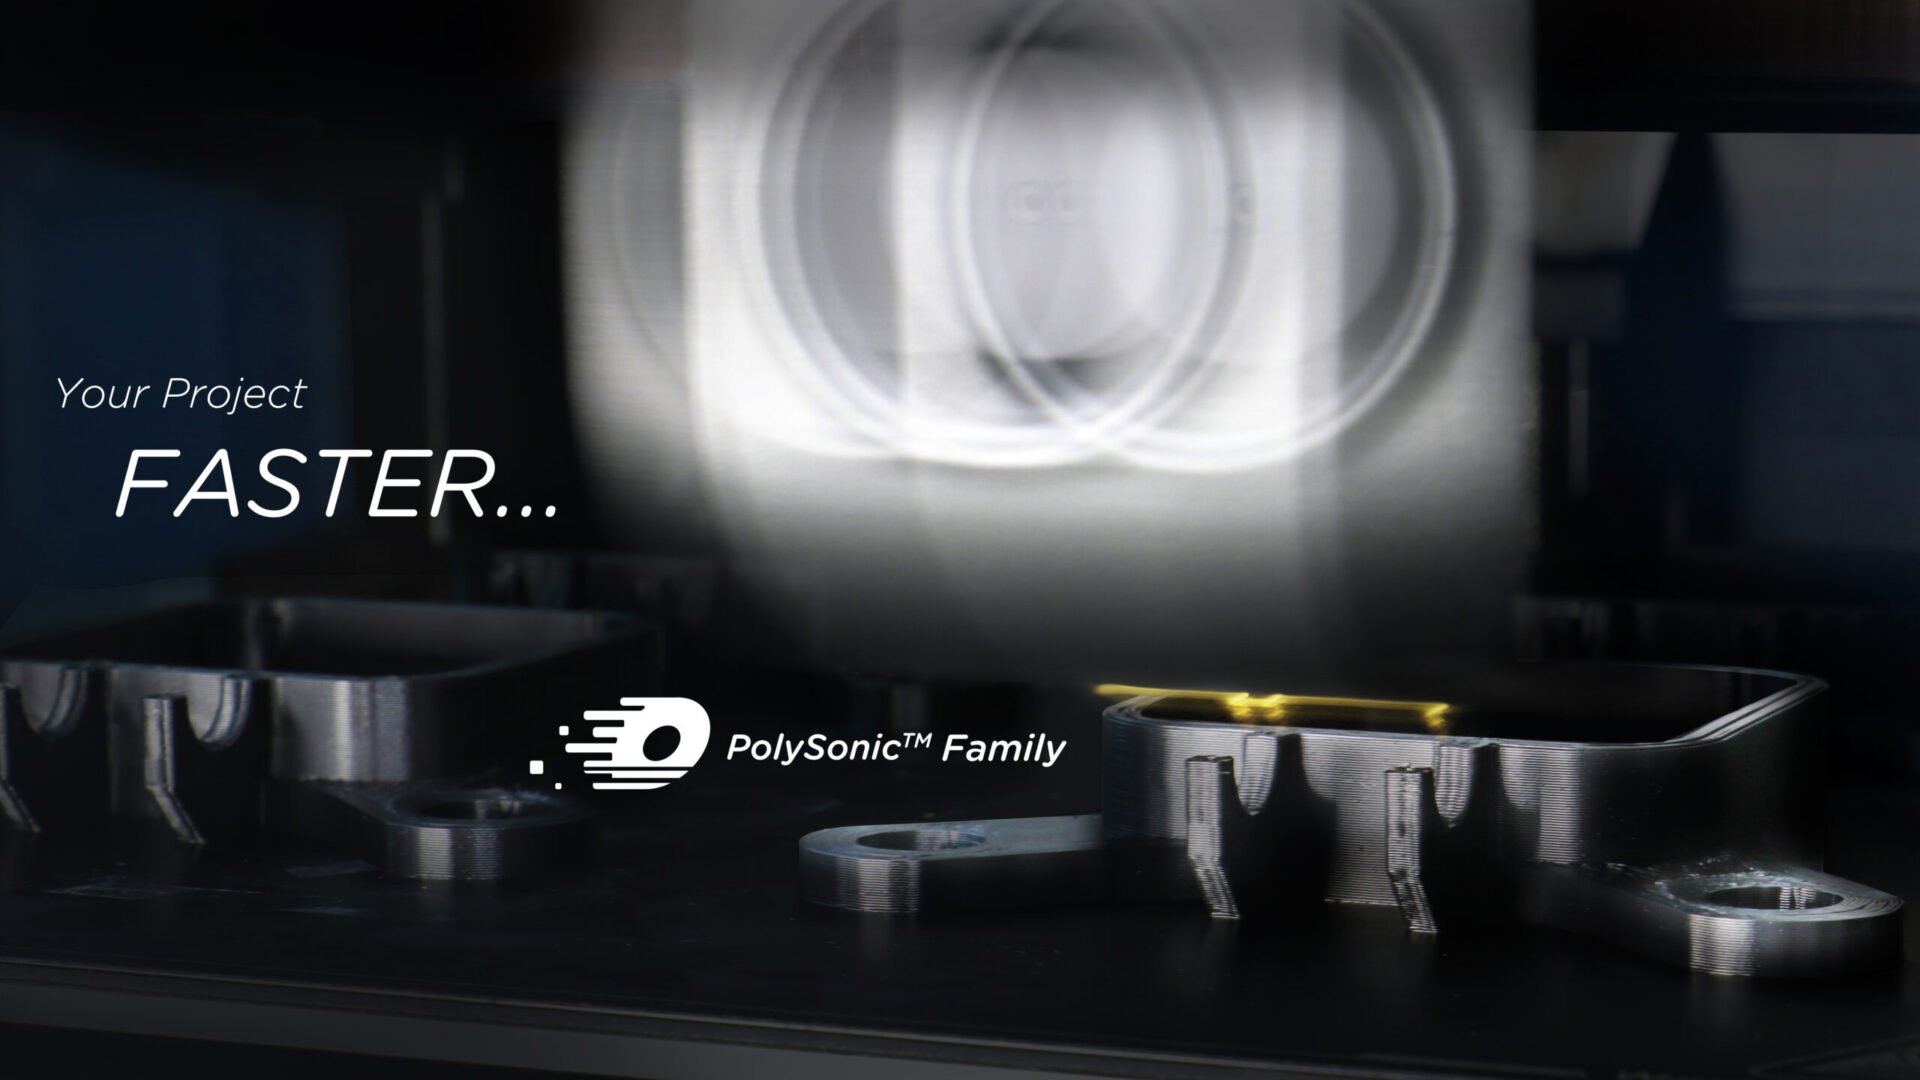 PolySonic™ Family - Your Project Faster